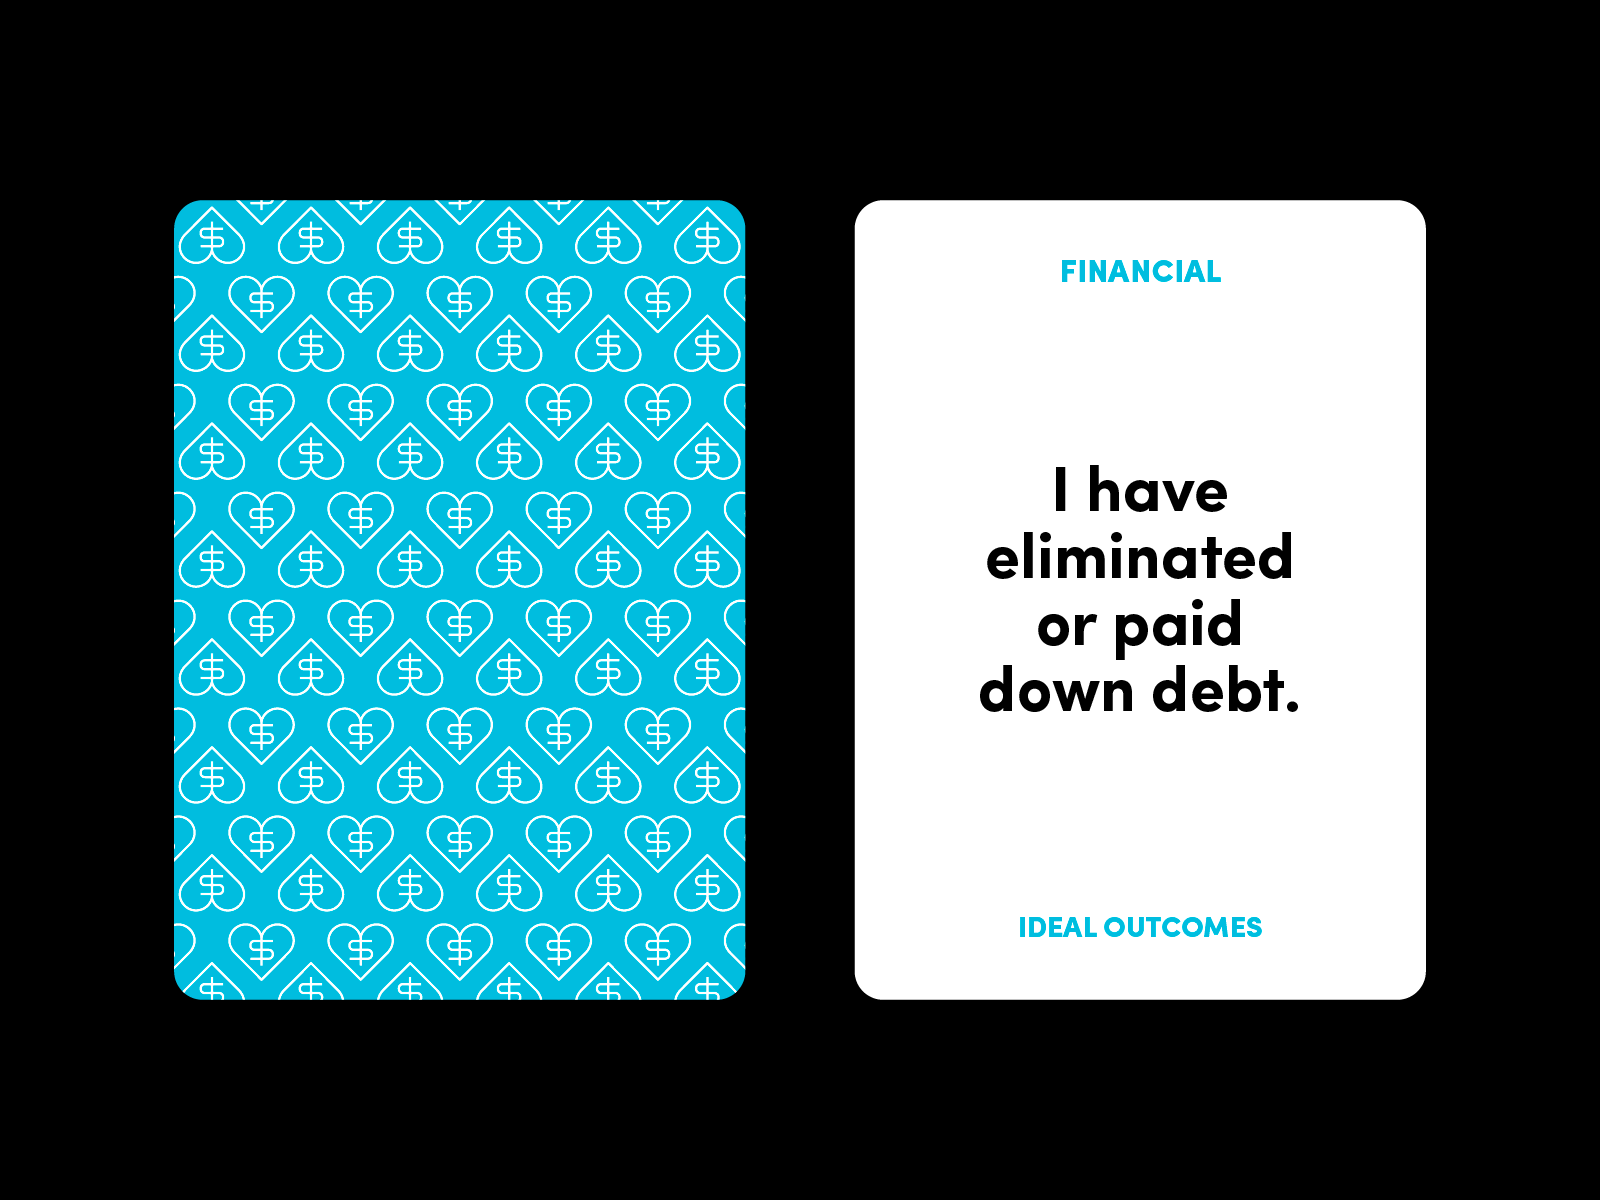 Ideal Outcomes Cards